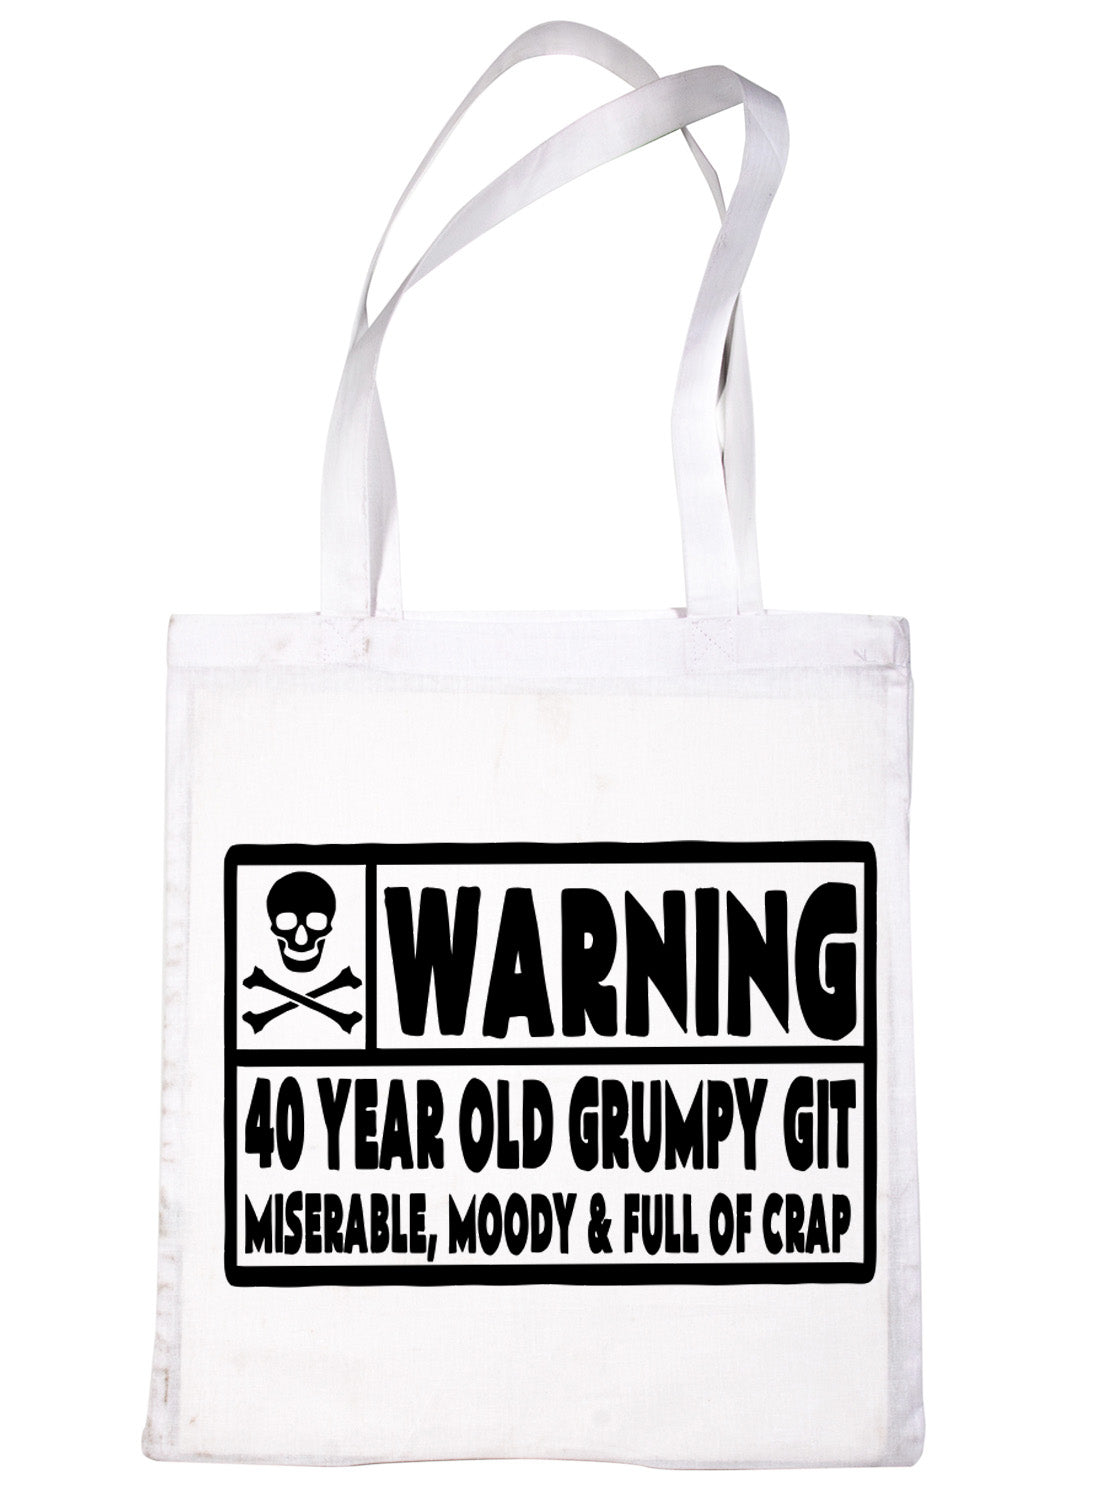 40 Year Old Git 40th Birthday Present Shopping Tote Bag Ladies Gift